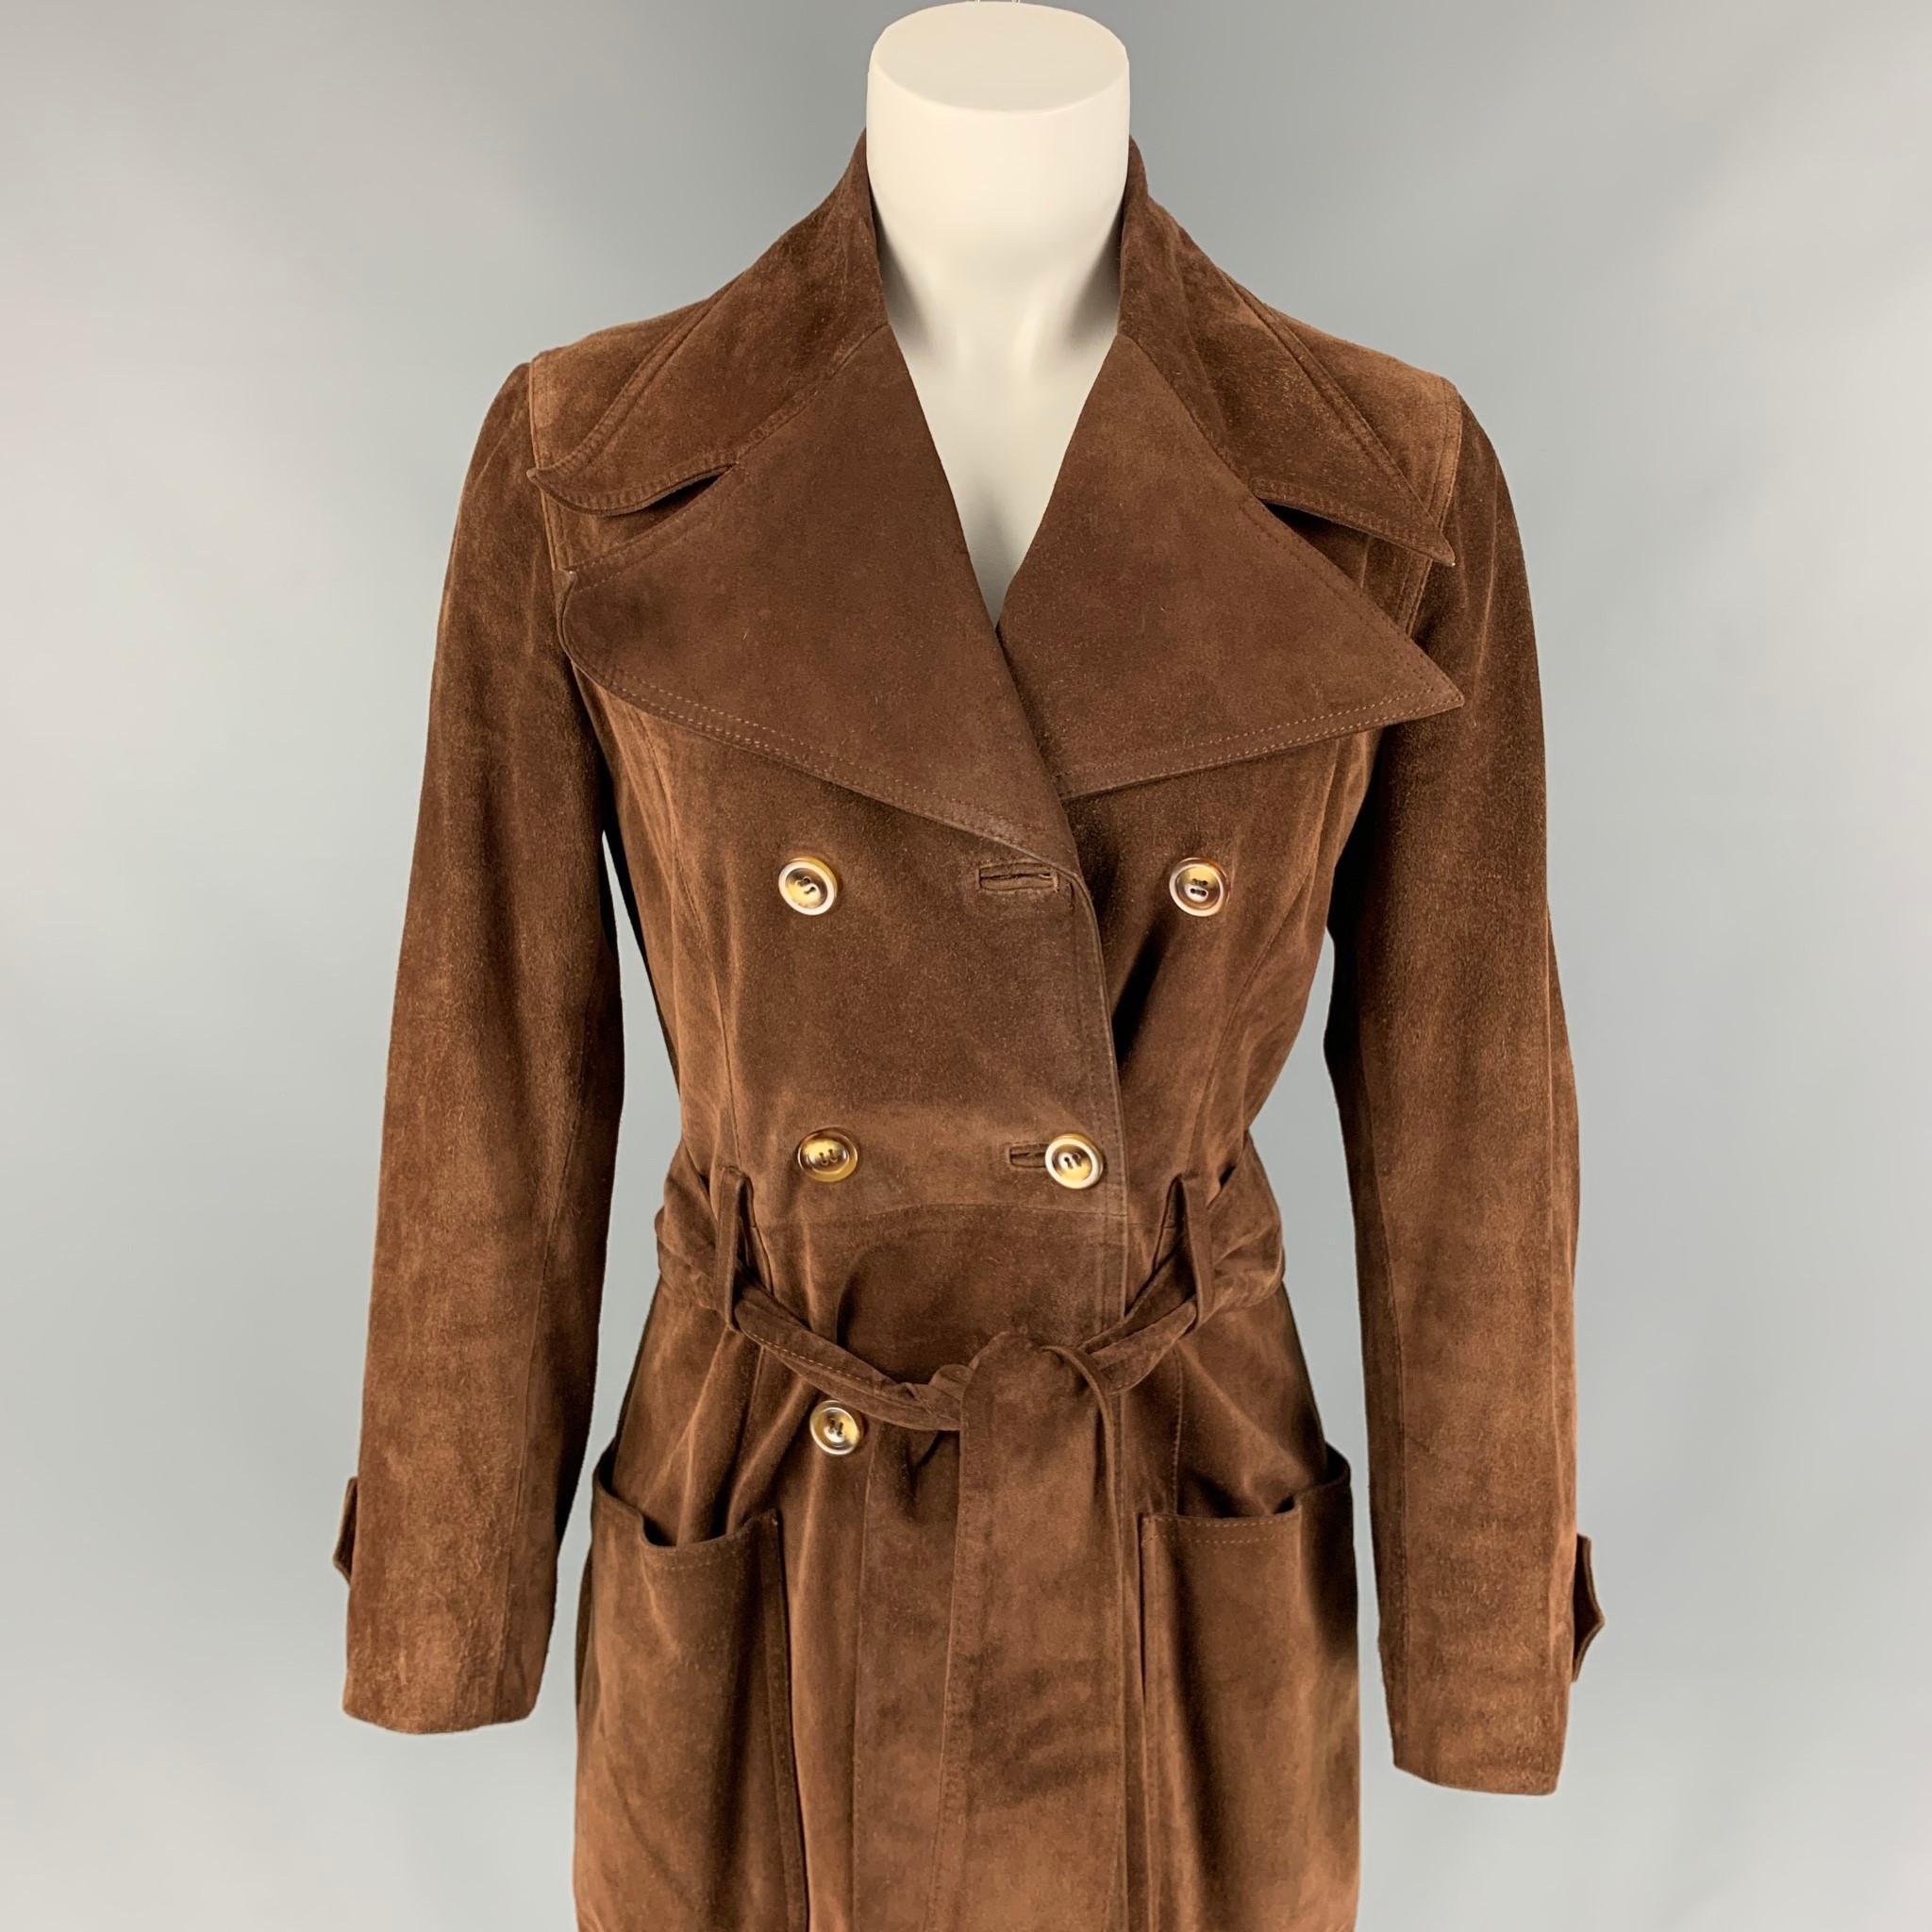 D&G by DOLCE & GABBANA trench coat comes in a brown suede with a full liner featuring a belted style, large lapel, patch pockets, and a double breasted closure. 

Good Pre-Owned Condition. Fabric tag removed.
Marked: Size tag